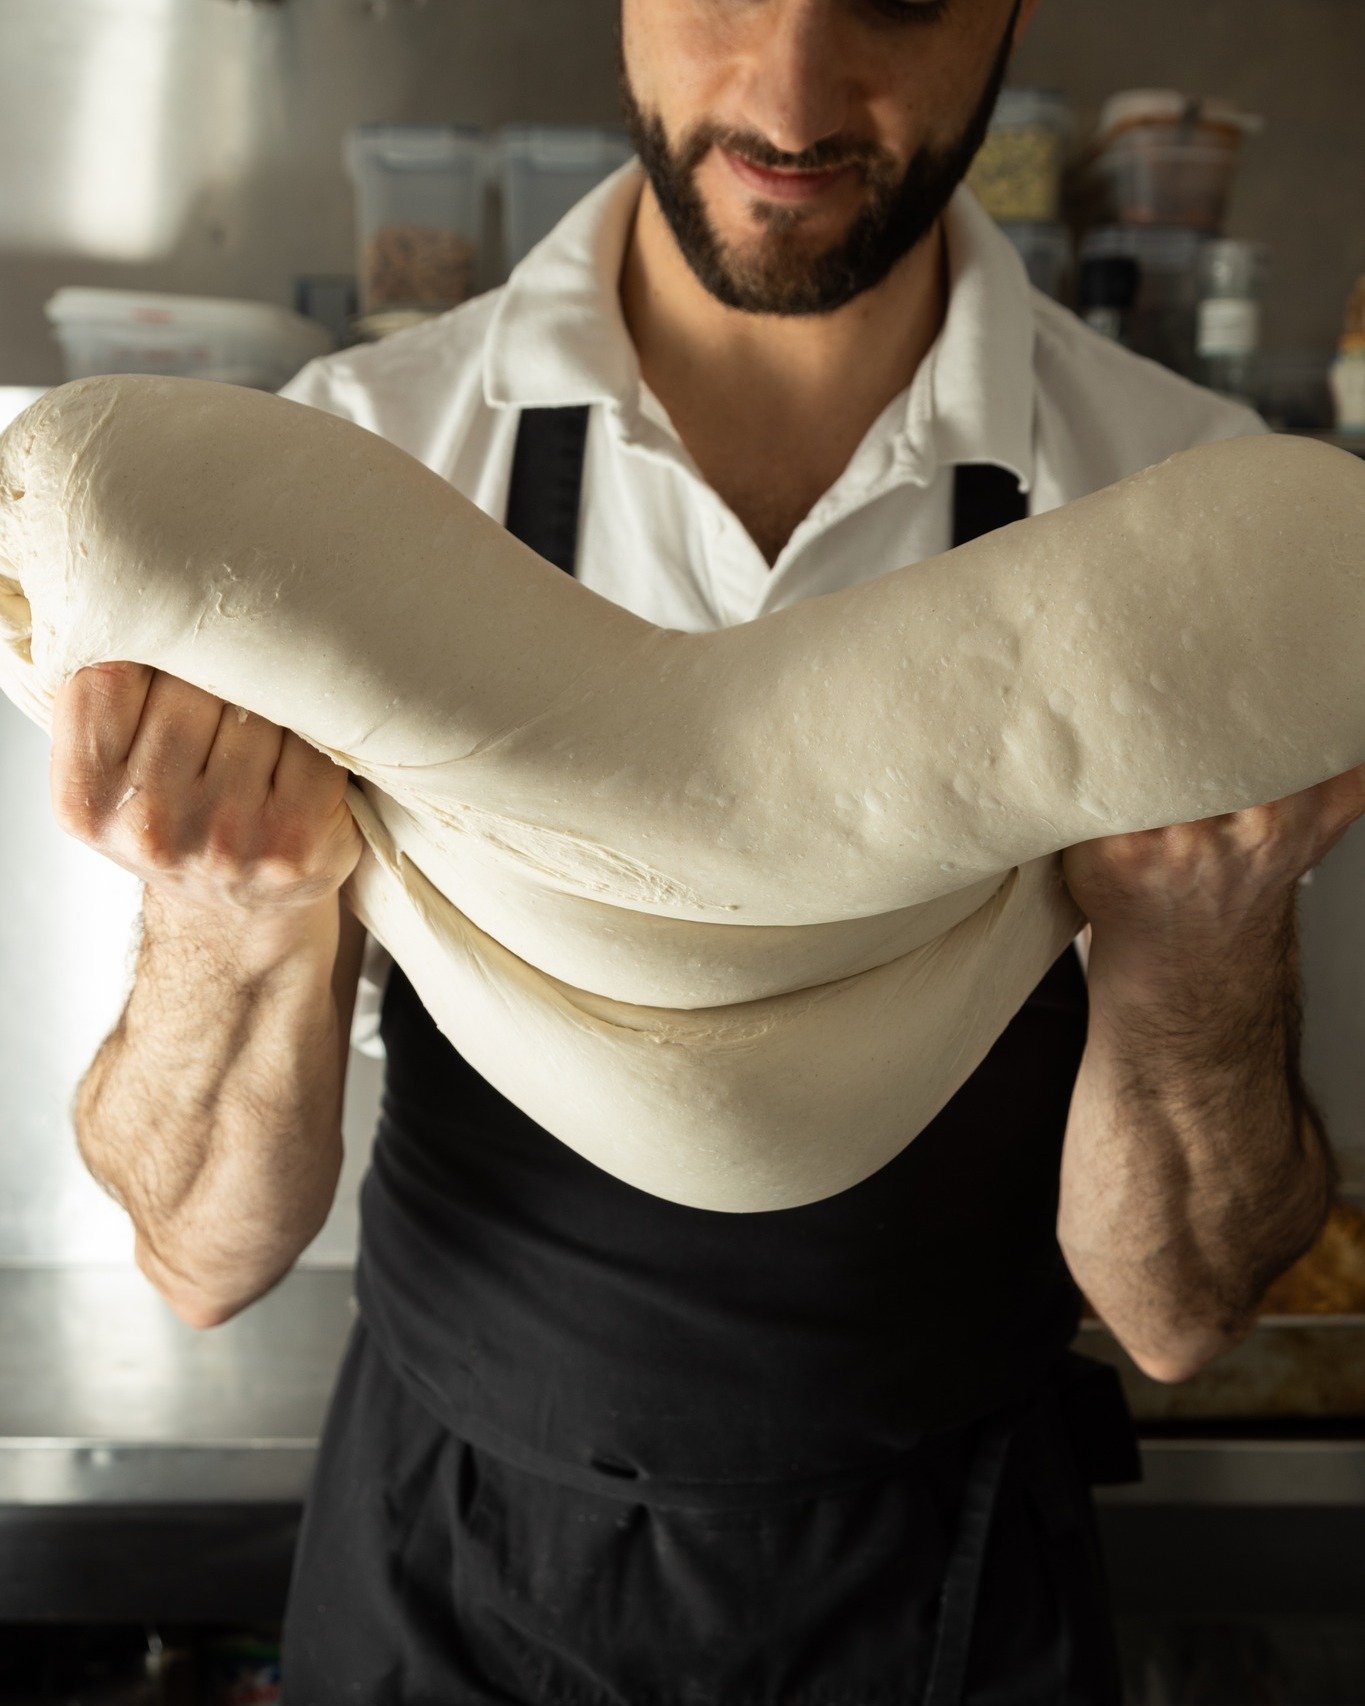 All our pizzas start with the freshness of our dough made from flour, yeast, and water! By working with the basics and ensuring their quality, our pizzas always embody homemade and authentic Italian flavors.
.
.
.
#pizzalovers #italia #pizzaiolo#50to